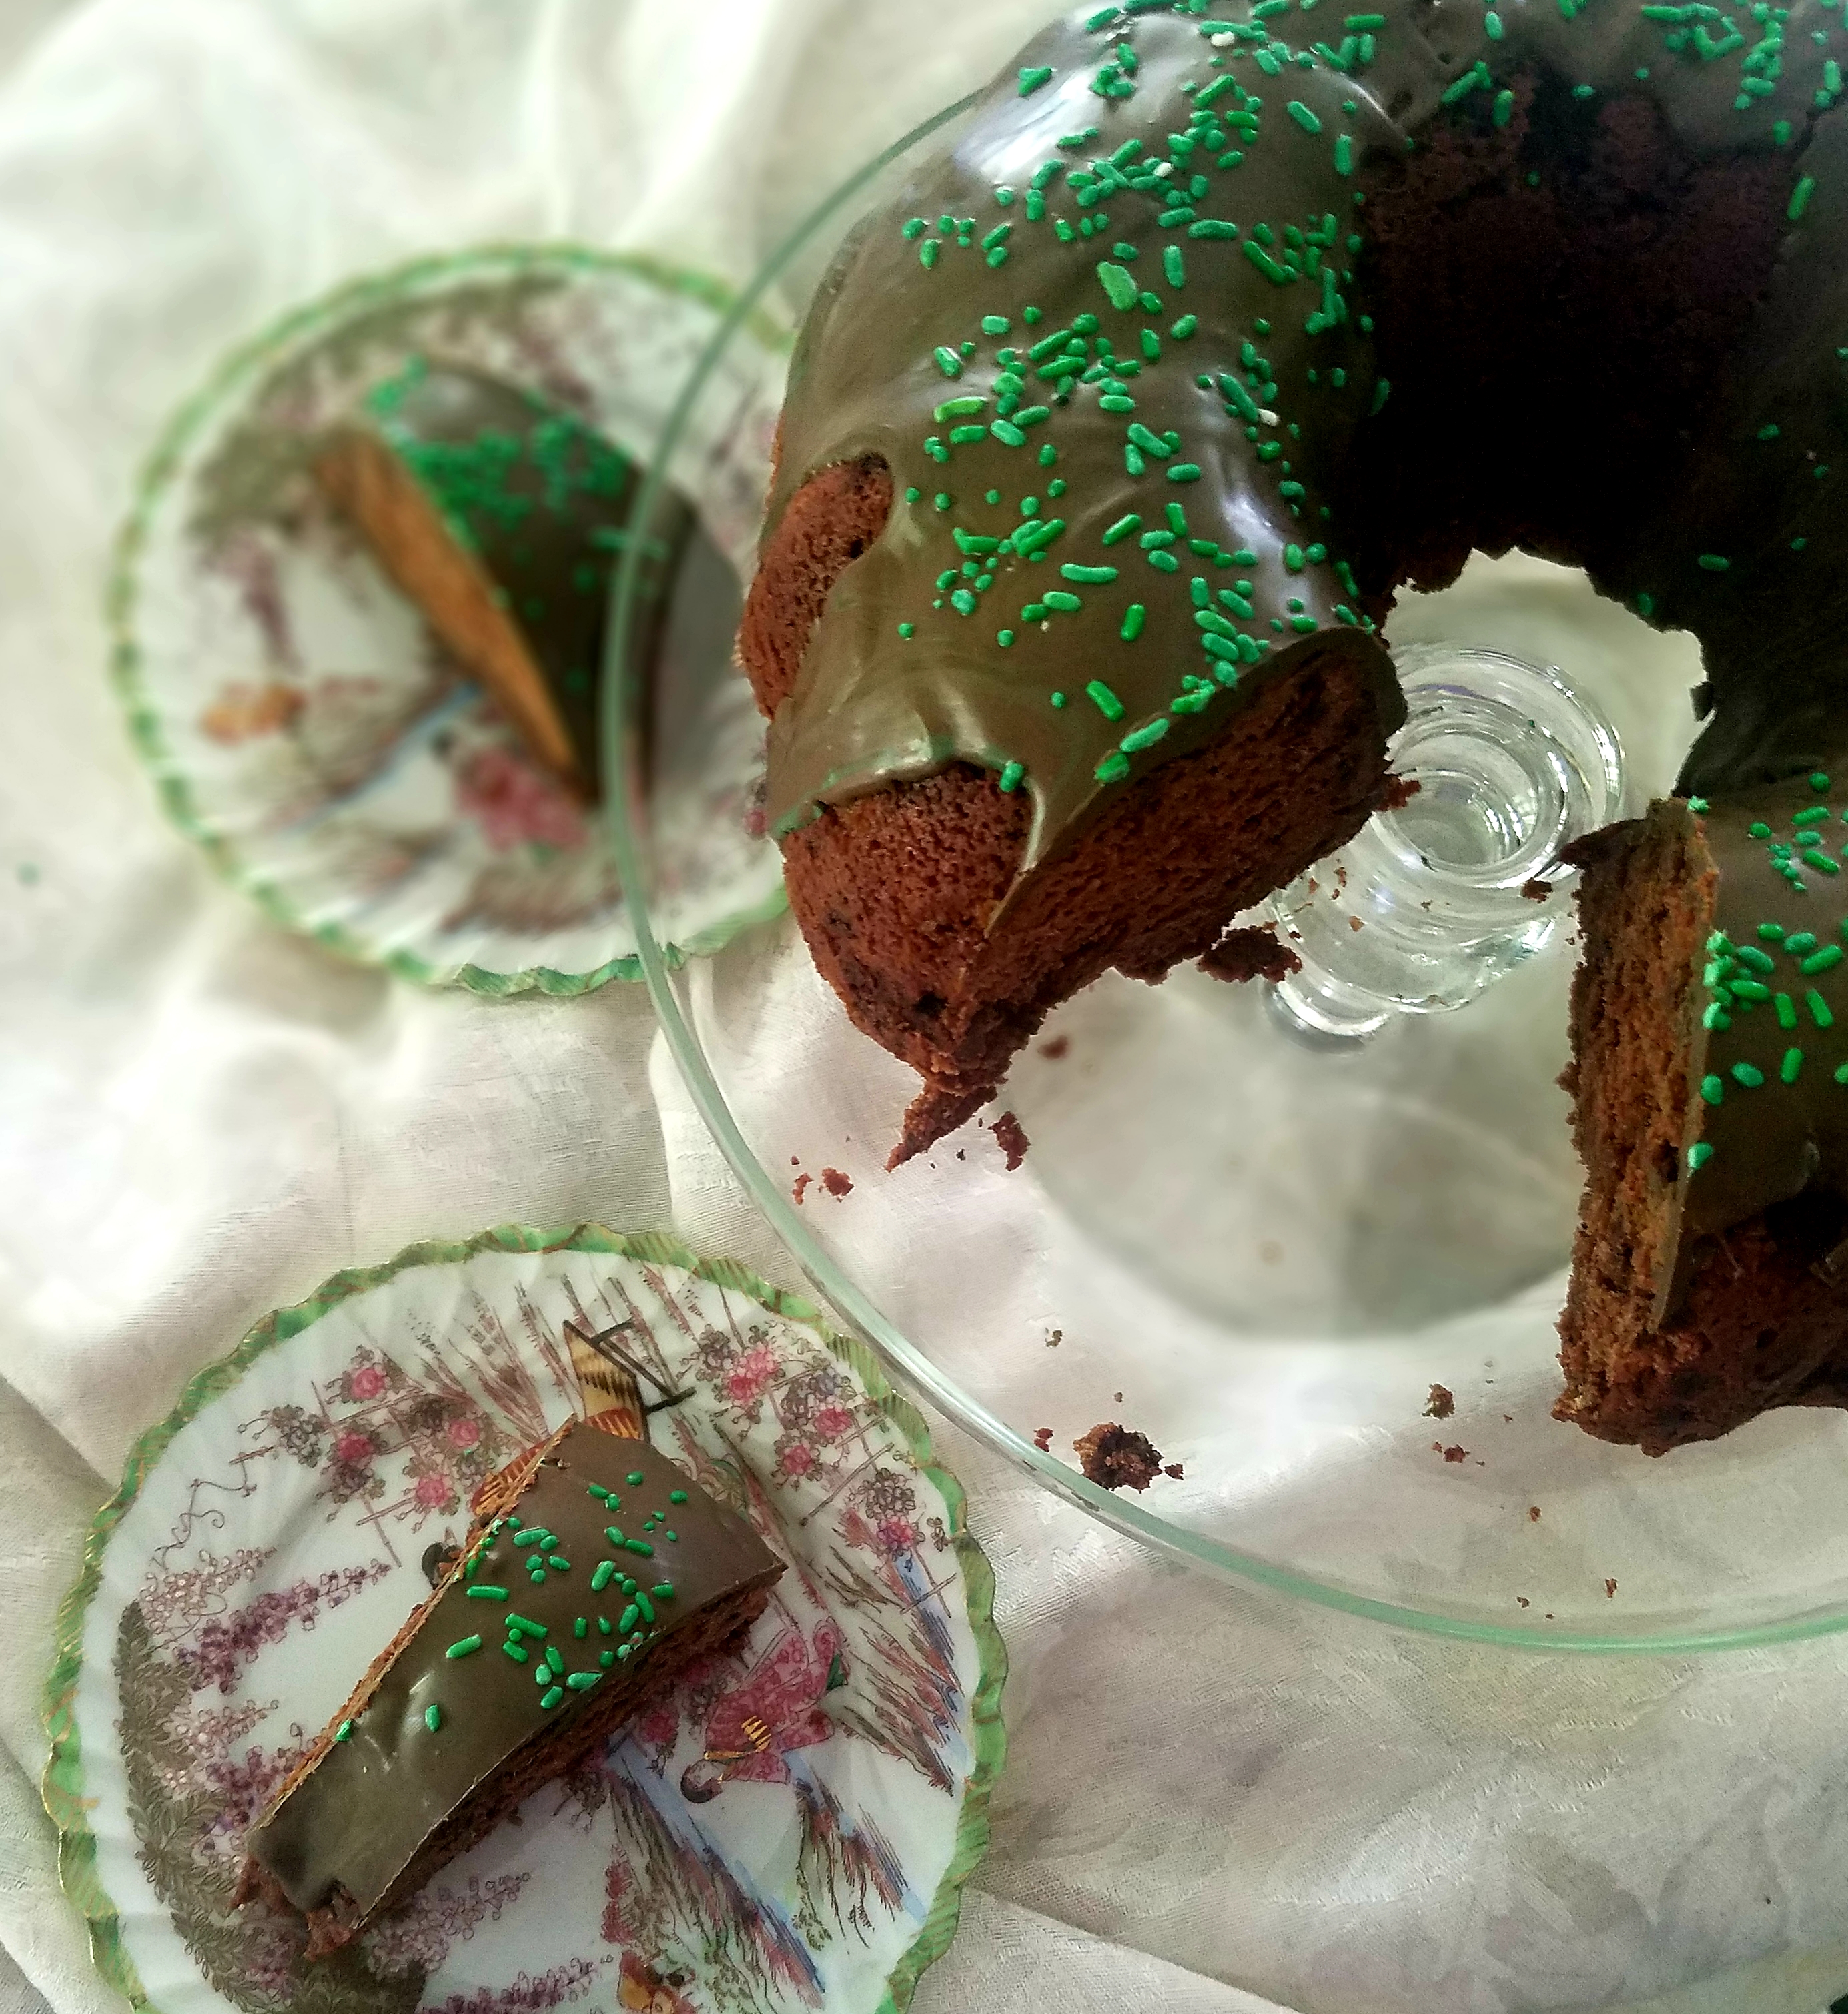 Mint Chocolate Cake (Reciped Inspired by THE MOTHER-IN-LAW)